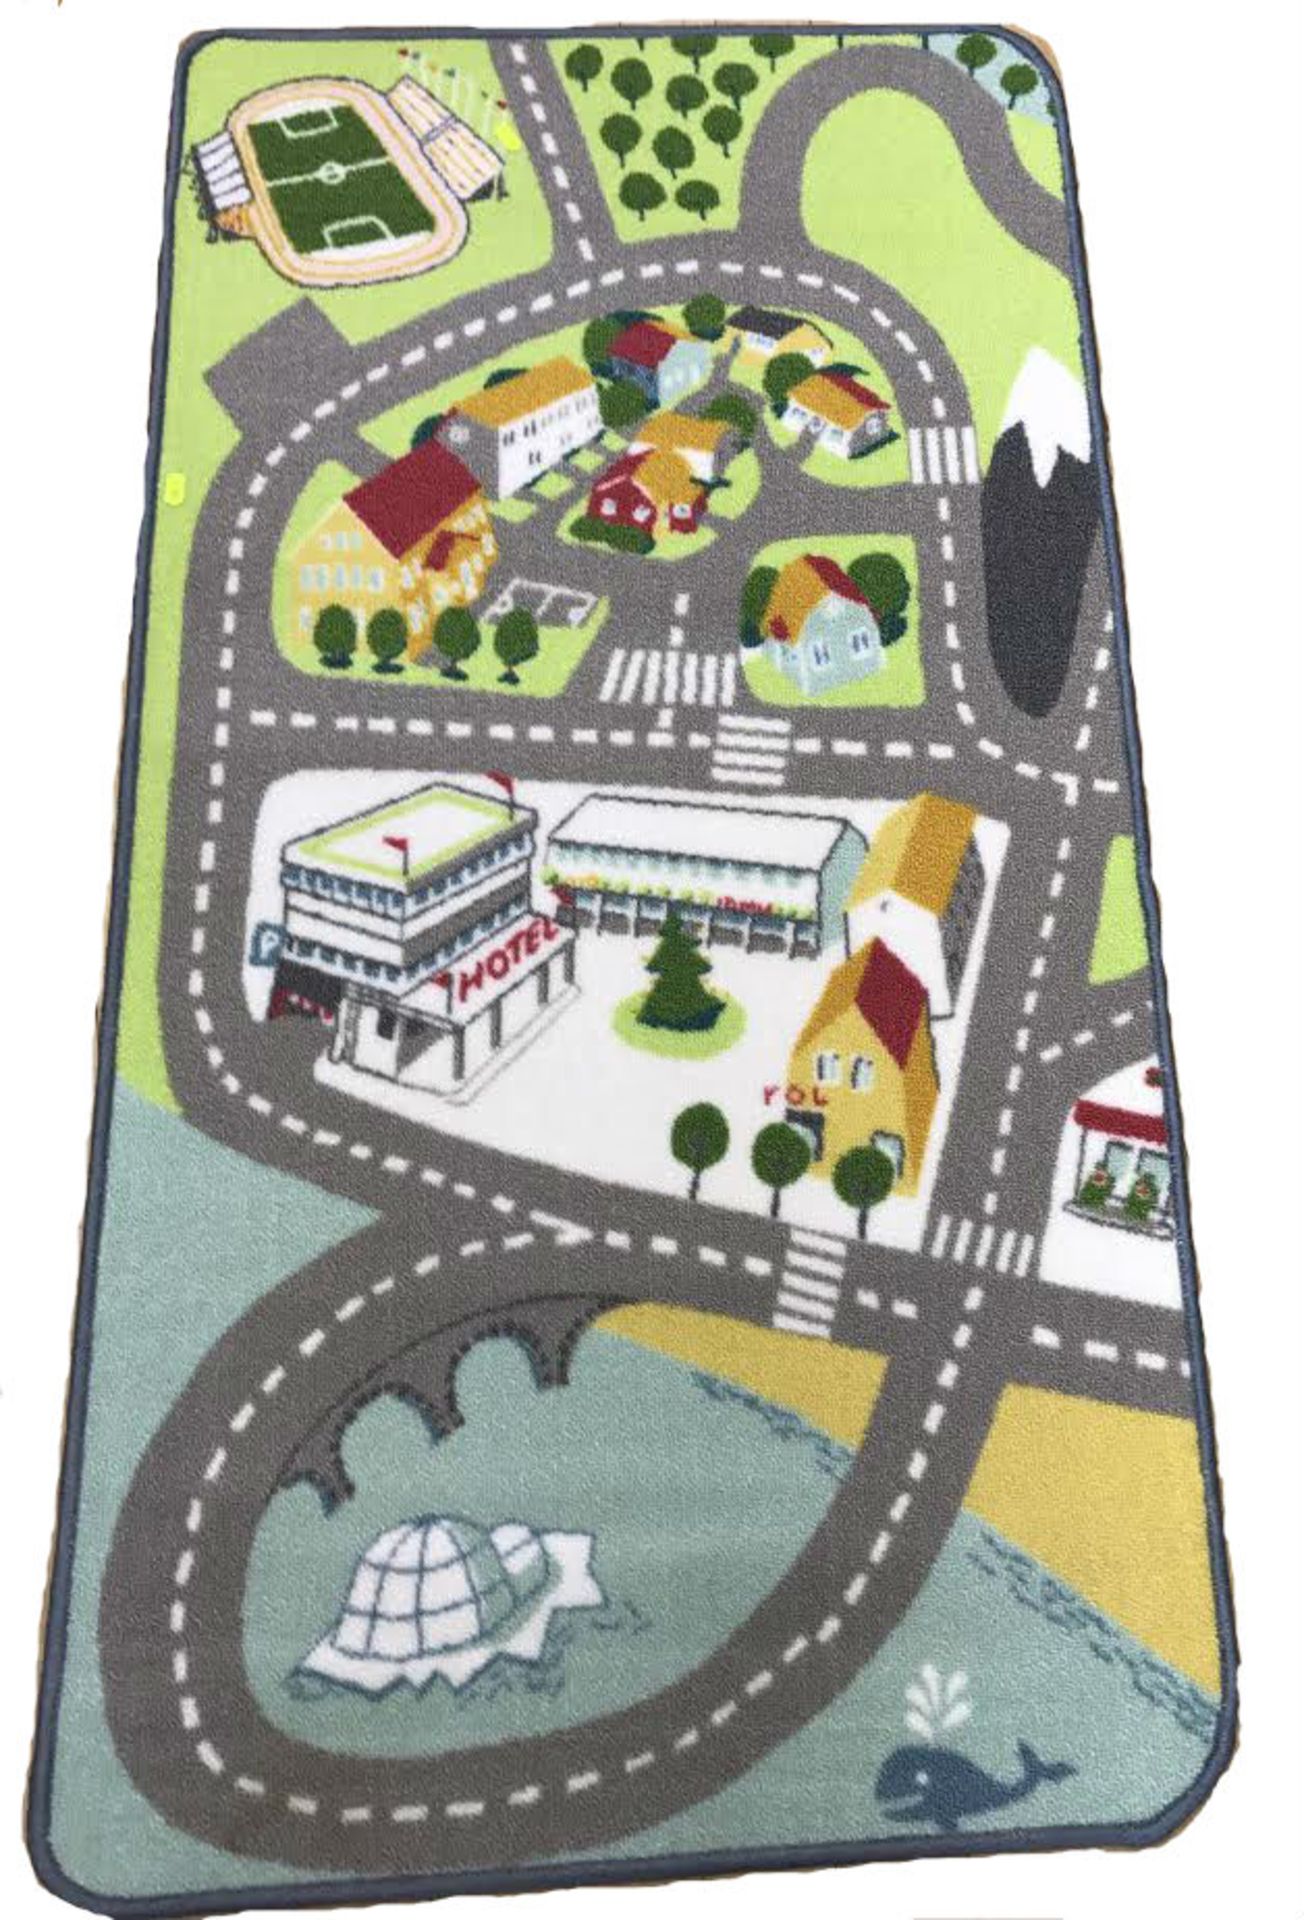 V *TRADE QTY* Brand New 133 x 70cm Childrens Play mat with Roads - Countryside - mountains and